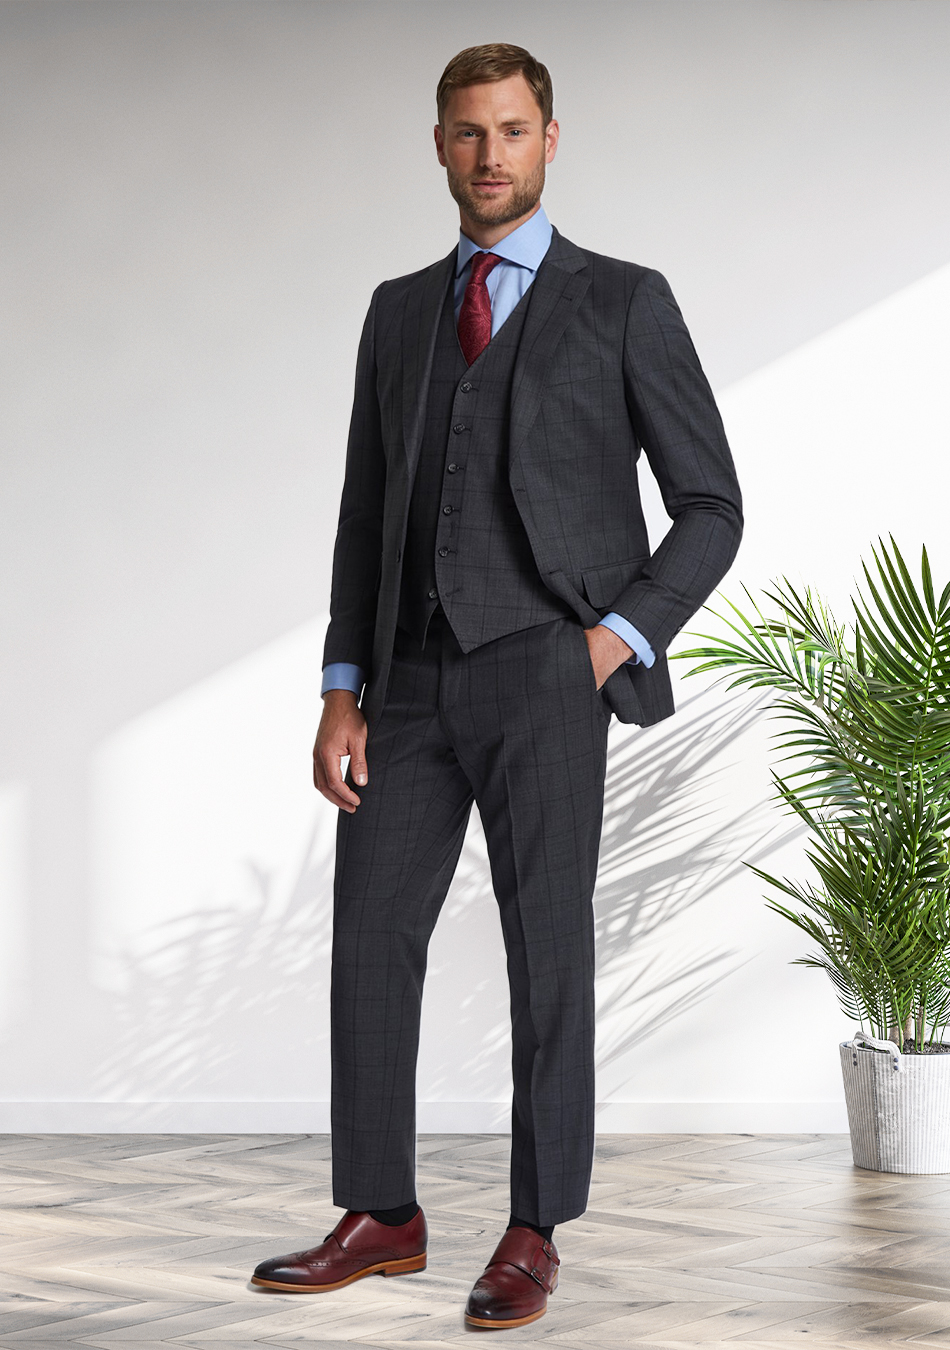 Charcoal grey three-piece suit, blue dress shirt, and burgundy monk straps